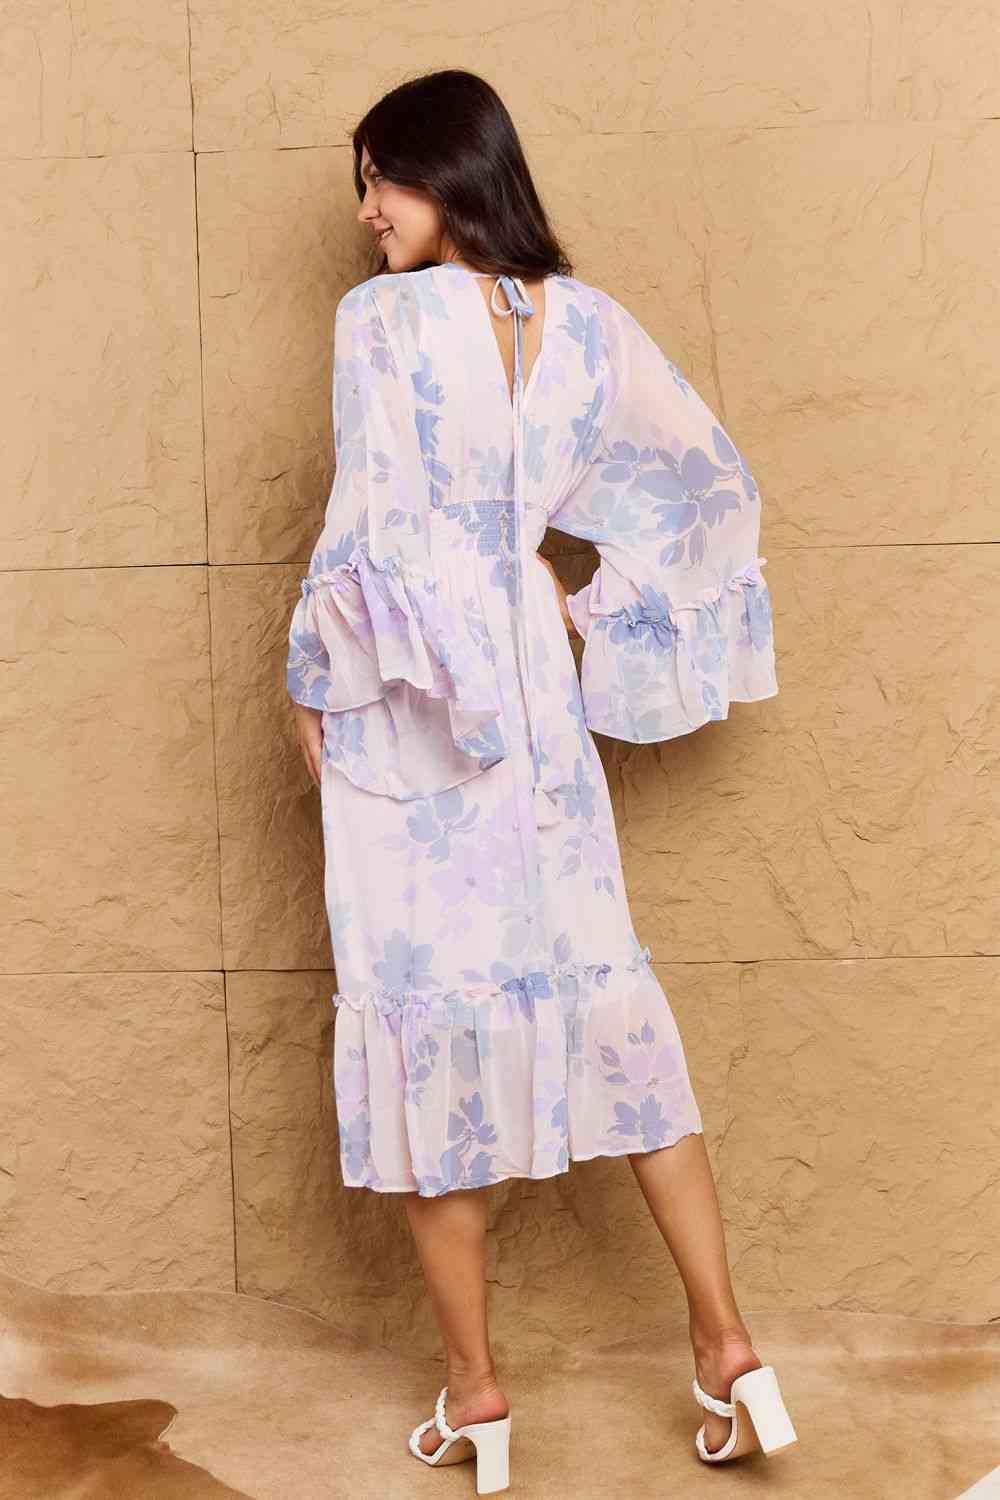 Take Me With You Floral Bell Sleeve Midi Dress in Blue - All Dresses - Dresses - 2 - 2024